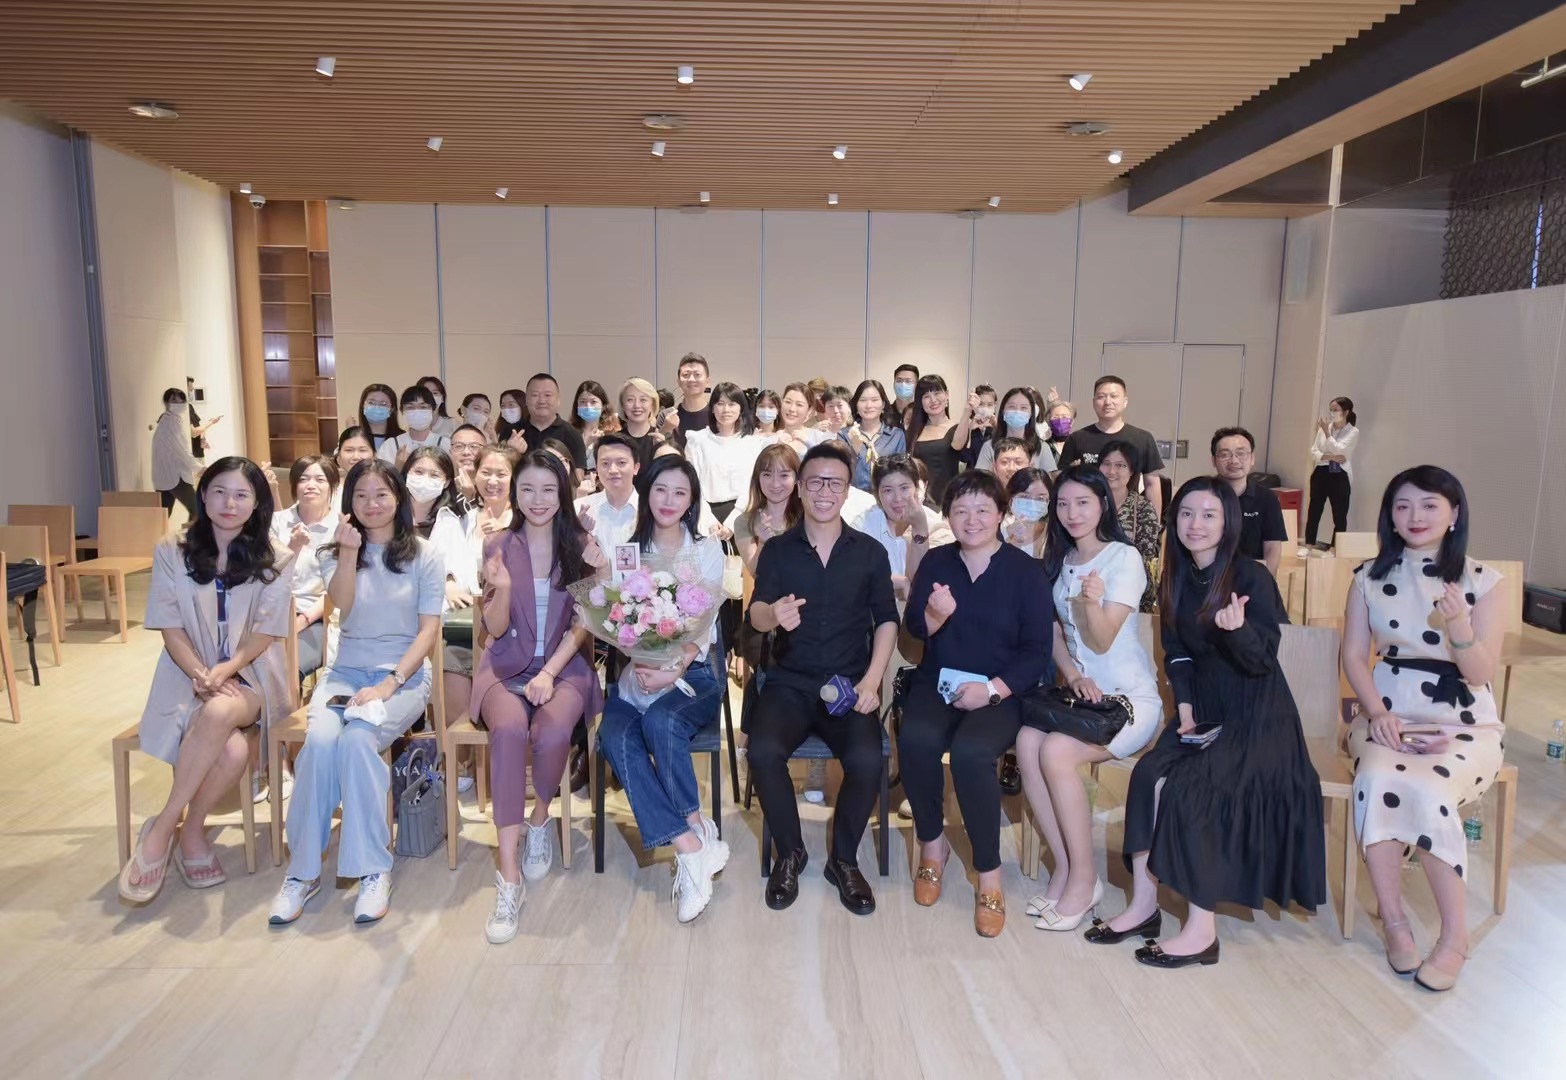 Tian Pujun shared experience with 10,000 women face-to-face, and a new book sharing meeting was held across the country